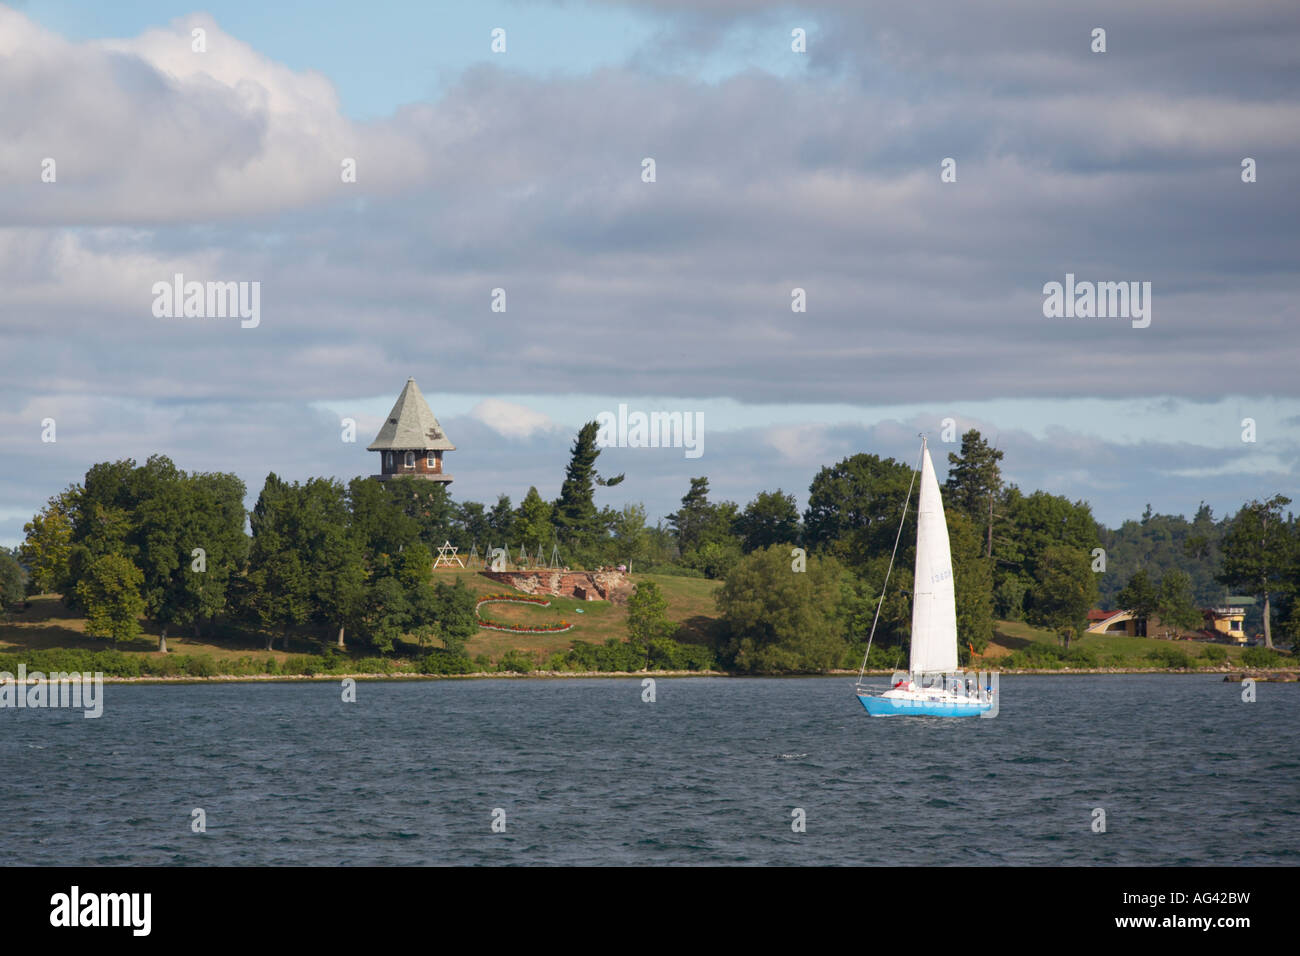 Sailboat in the St Lawrence River in the Thousand Islands St Lawrence Seaway region of New York State Stock Photo